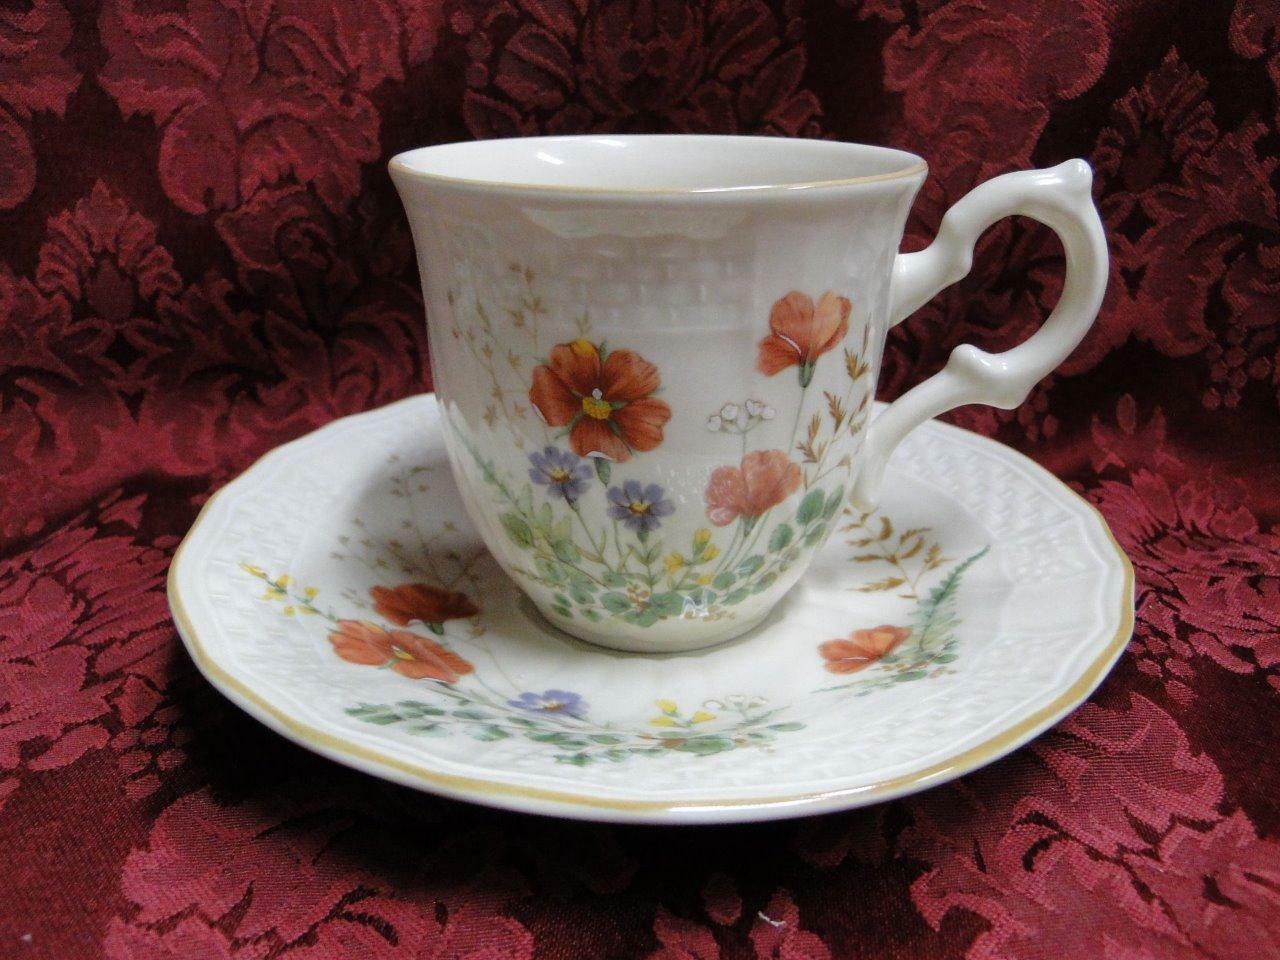 Mikasa Margaux, Rust & Yellow Floral, Weave Rim: Cup & Saucer Set (s)